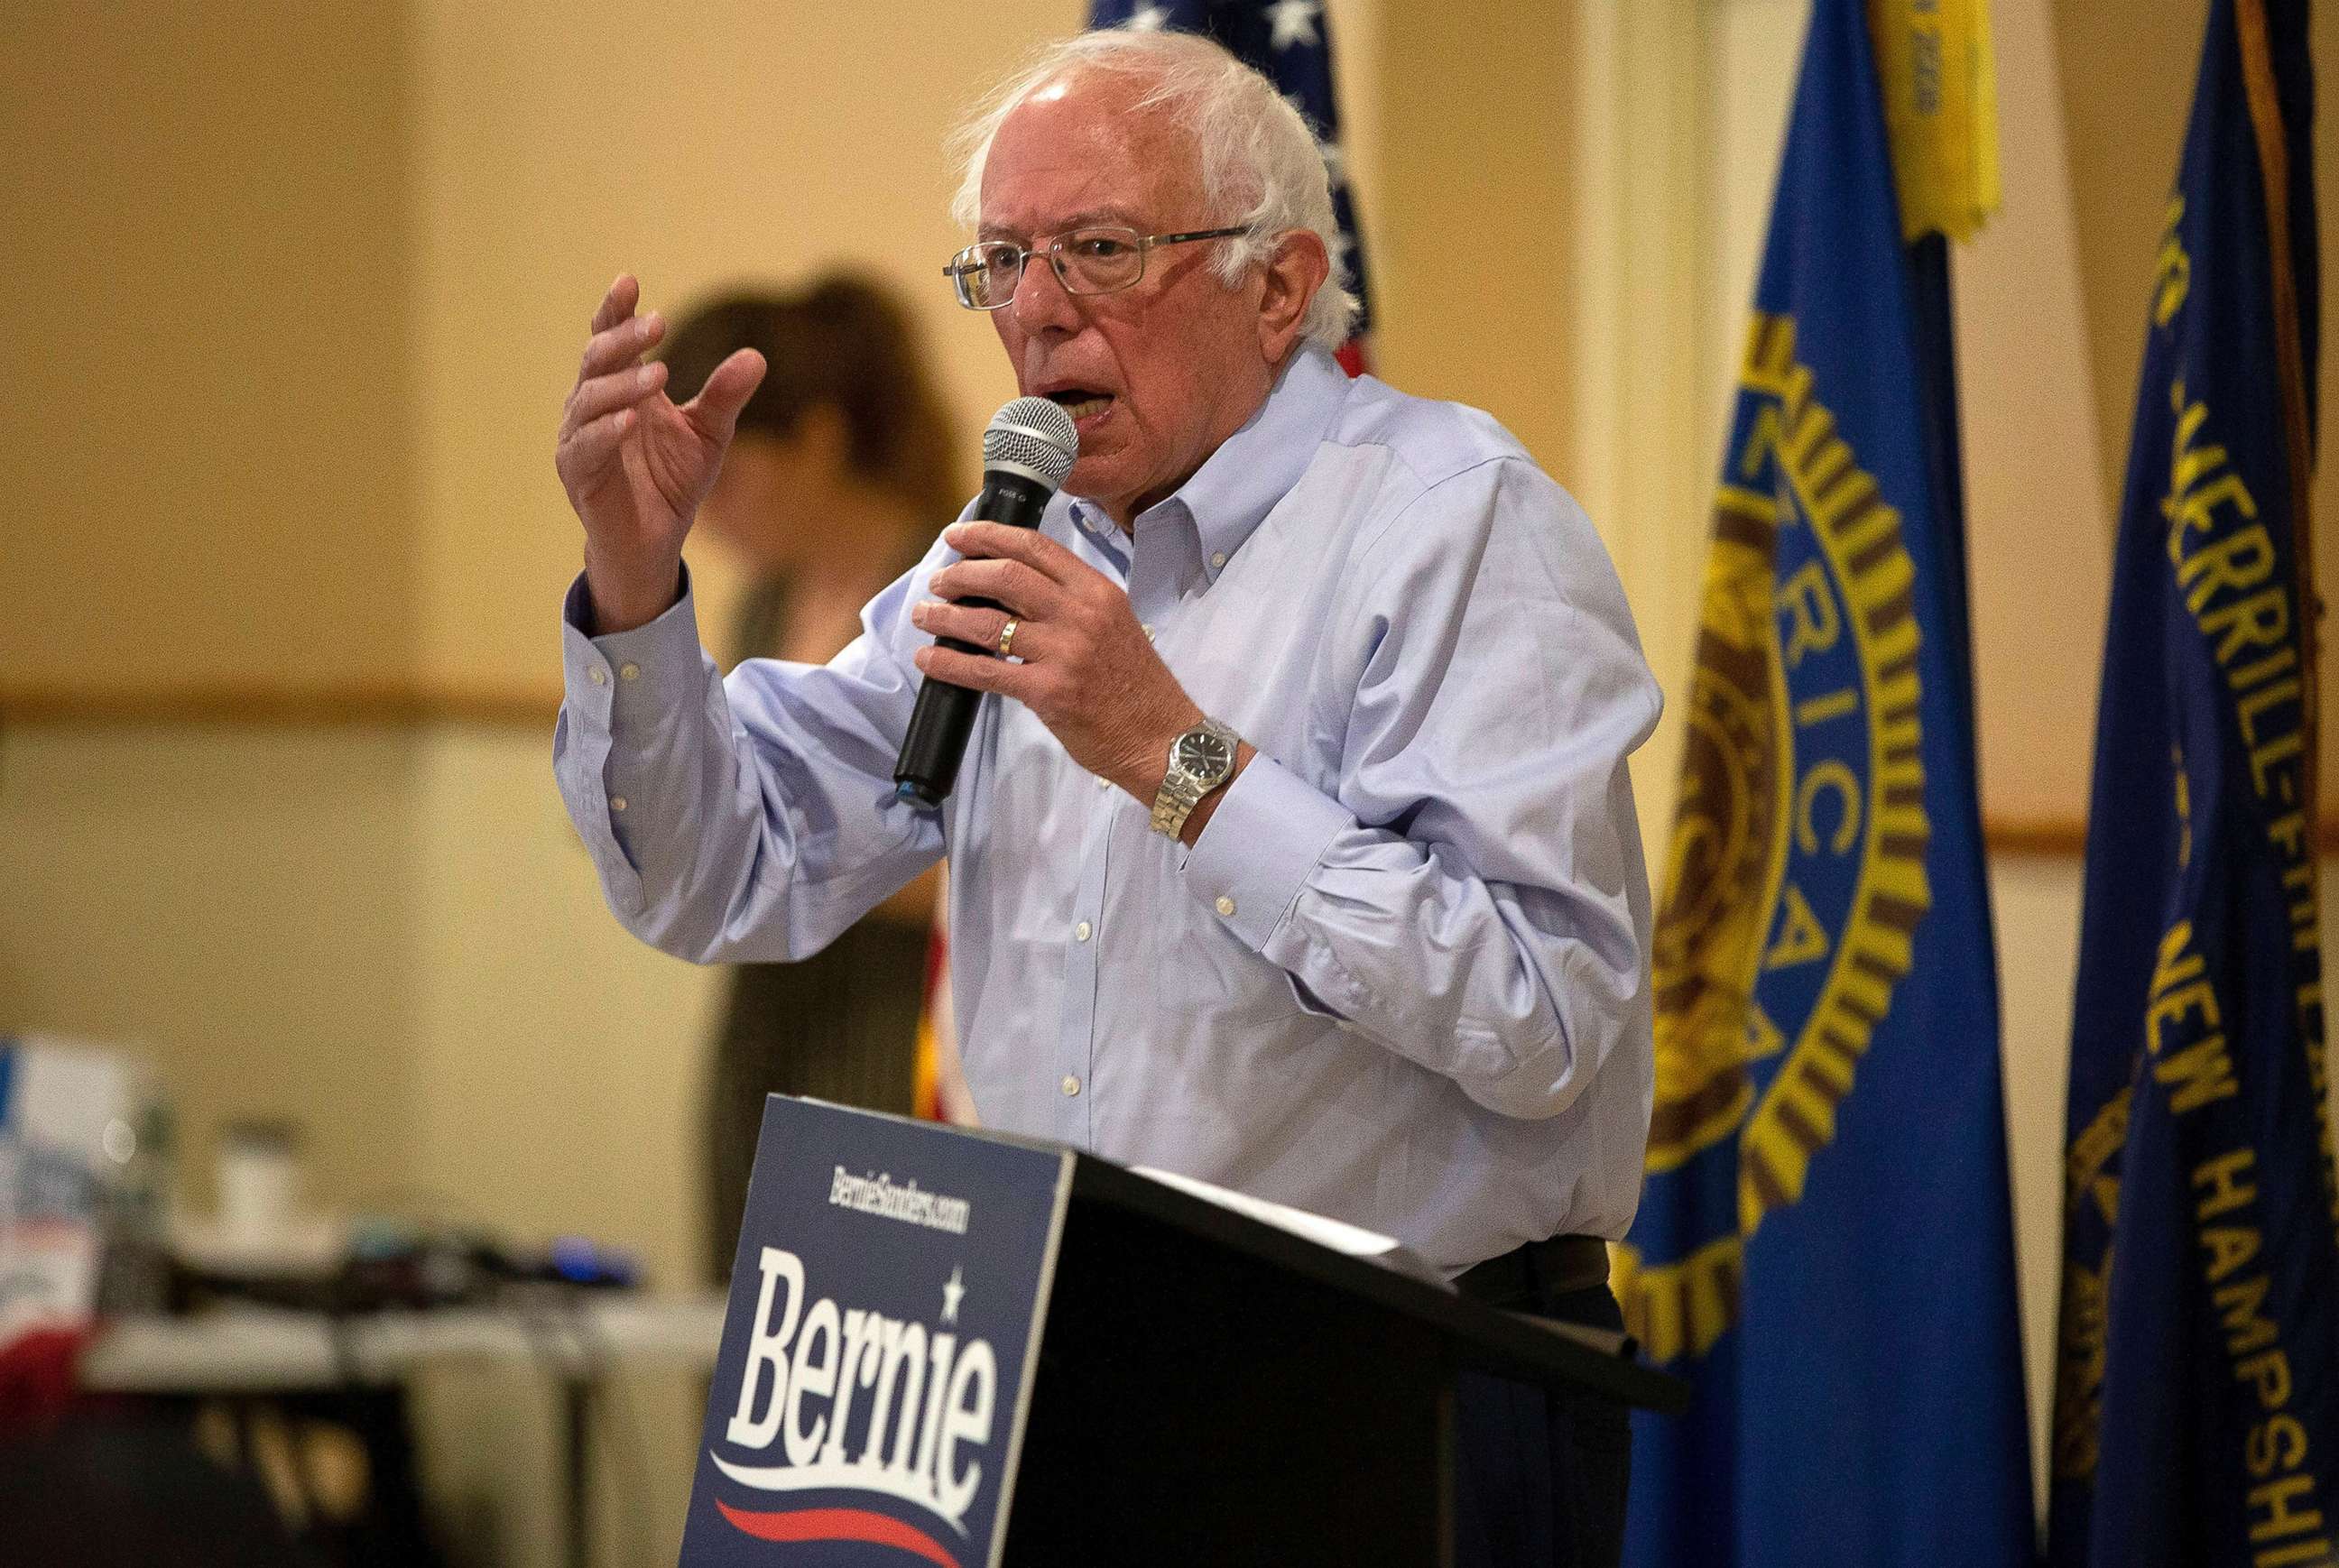 PHOTO: Democratic presidential candidate and US Senator from Vermont Bernie Sanders speaks at a rally in support of Chicago Public School teachers in Chicago, Ill., Sept. 24, 2019.